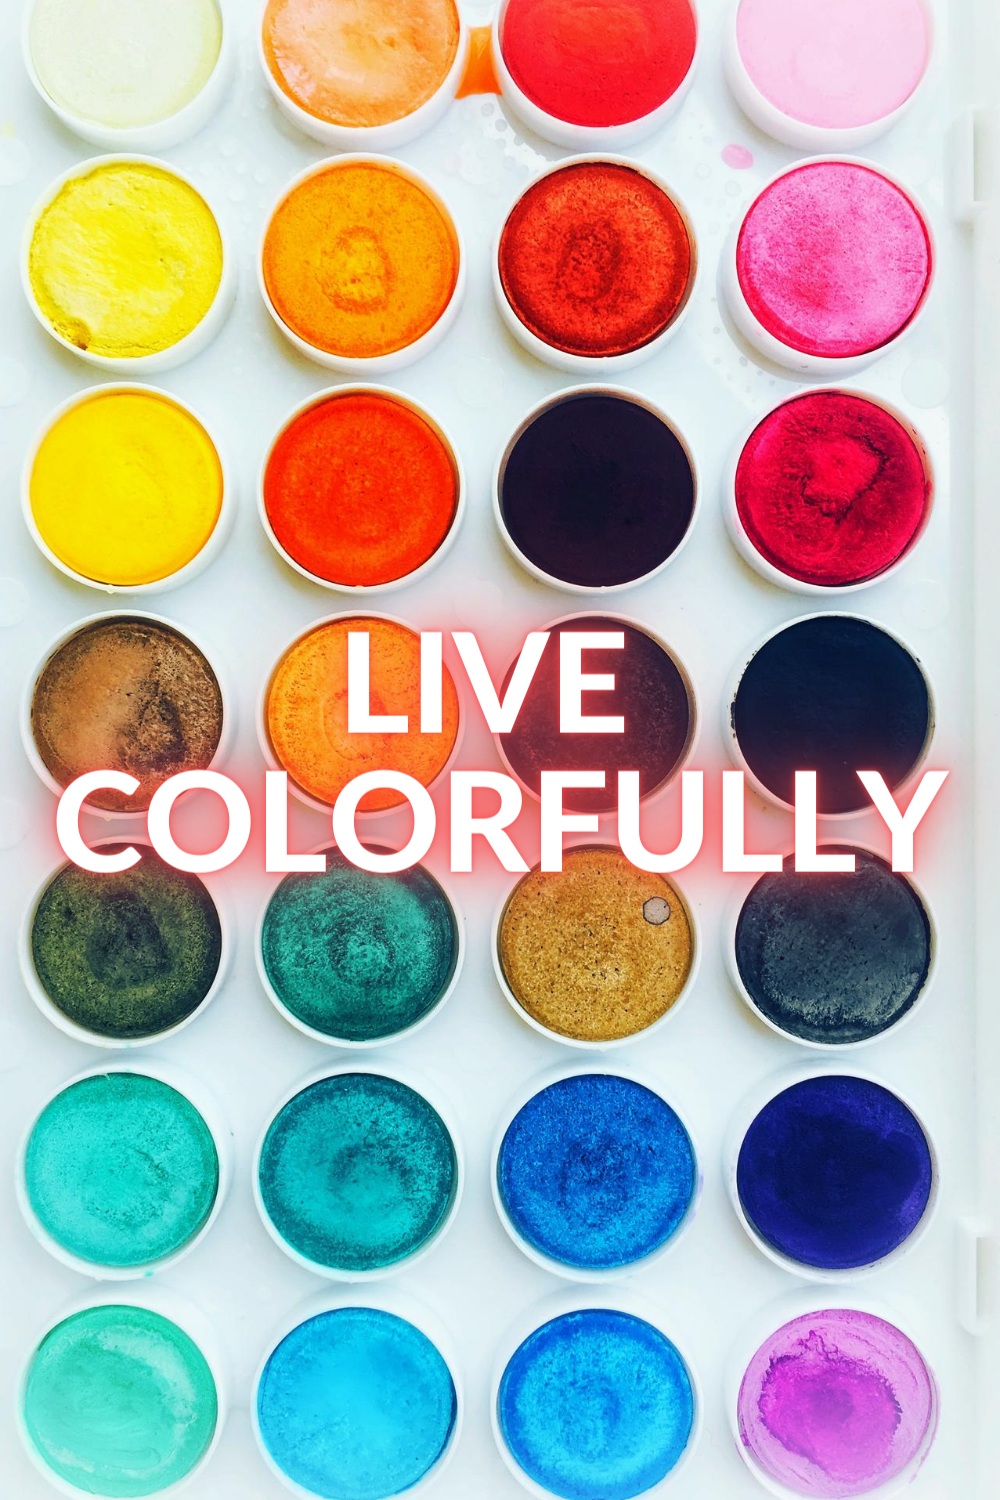 live colorfully.png